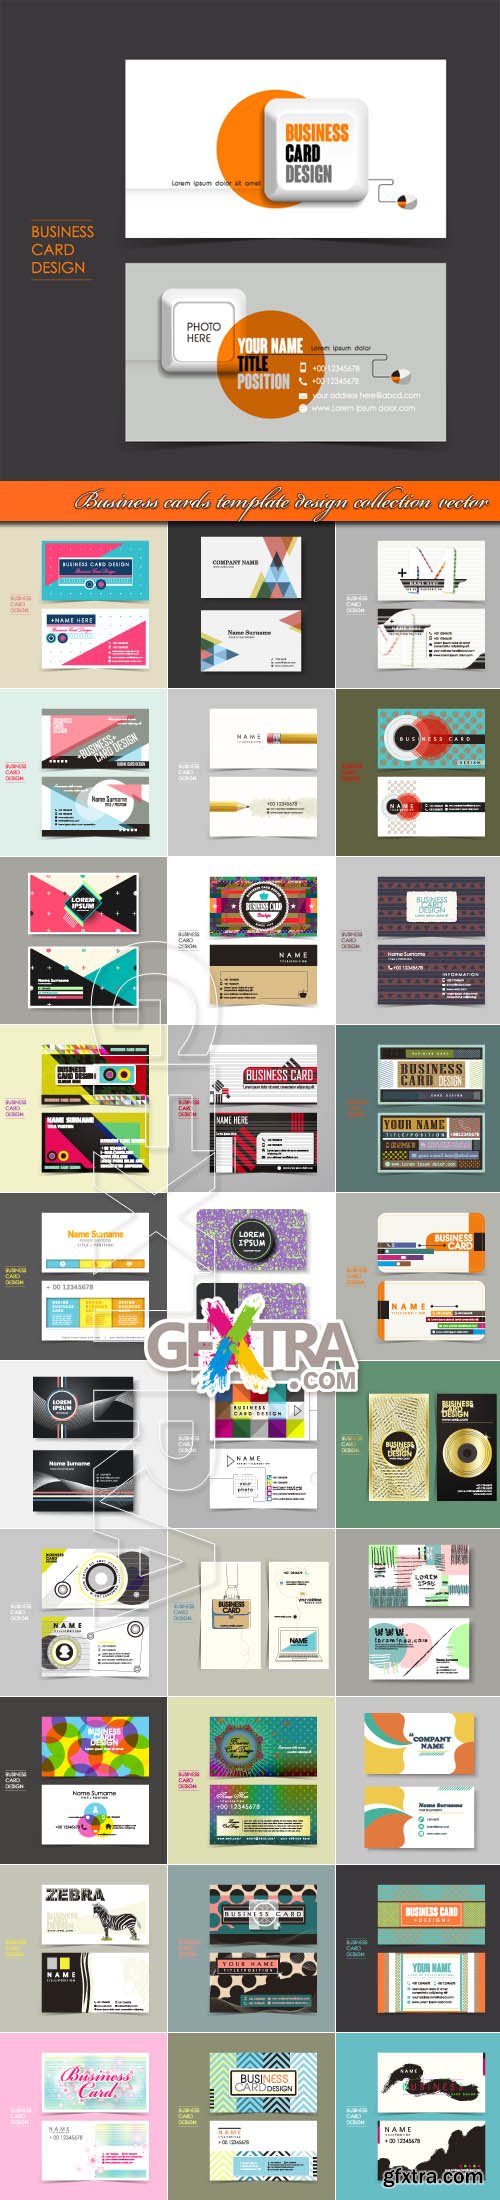 Business cards template design collection vector